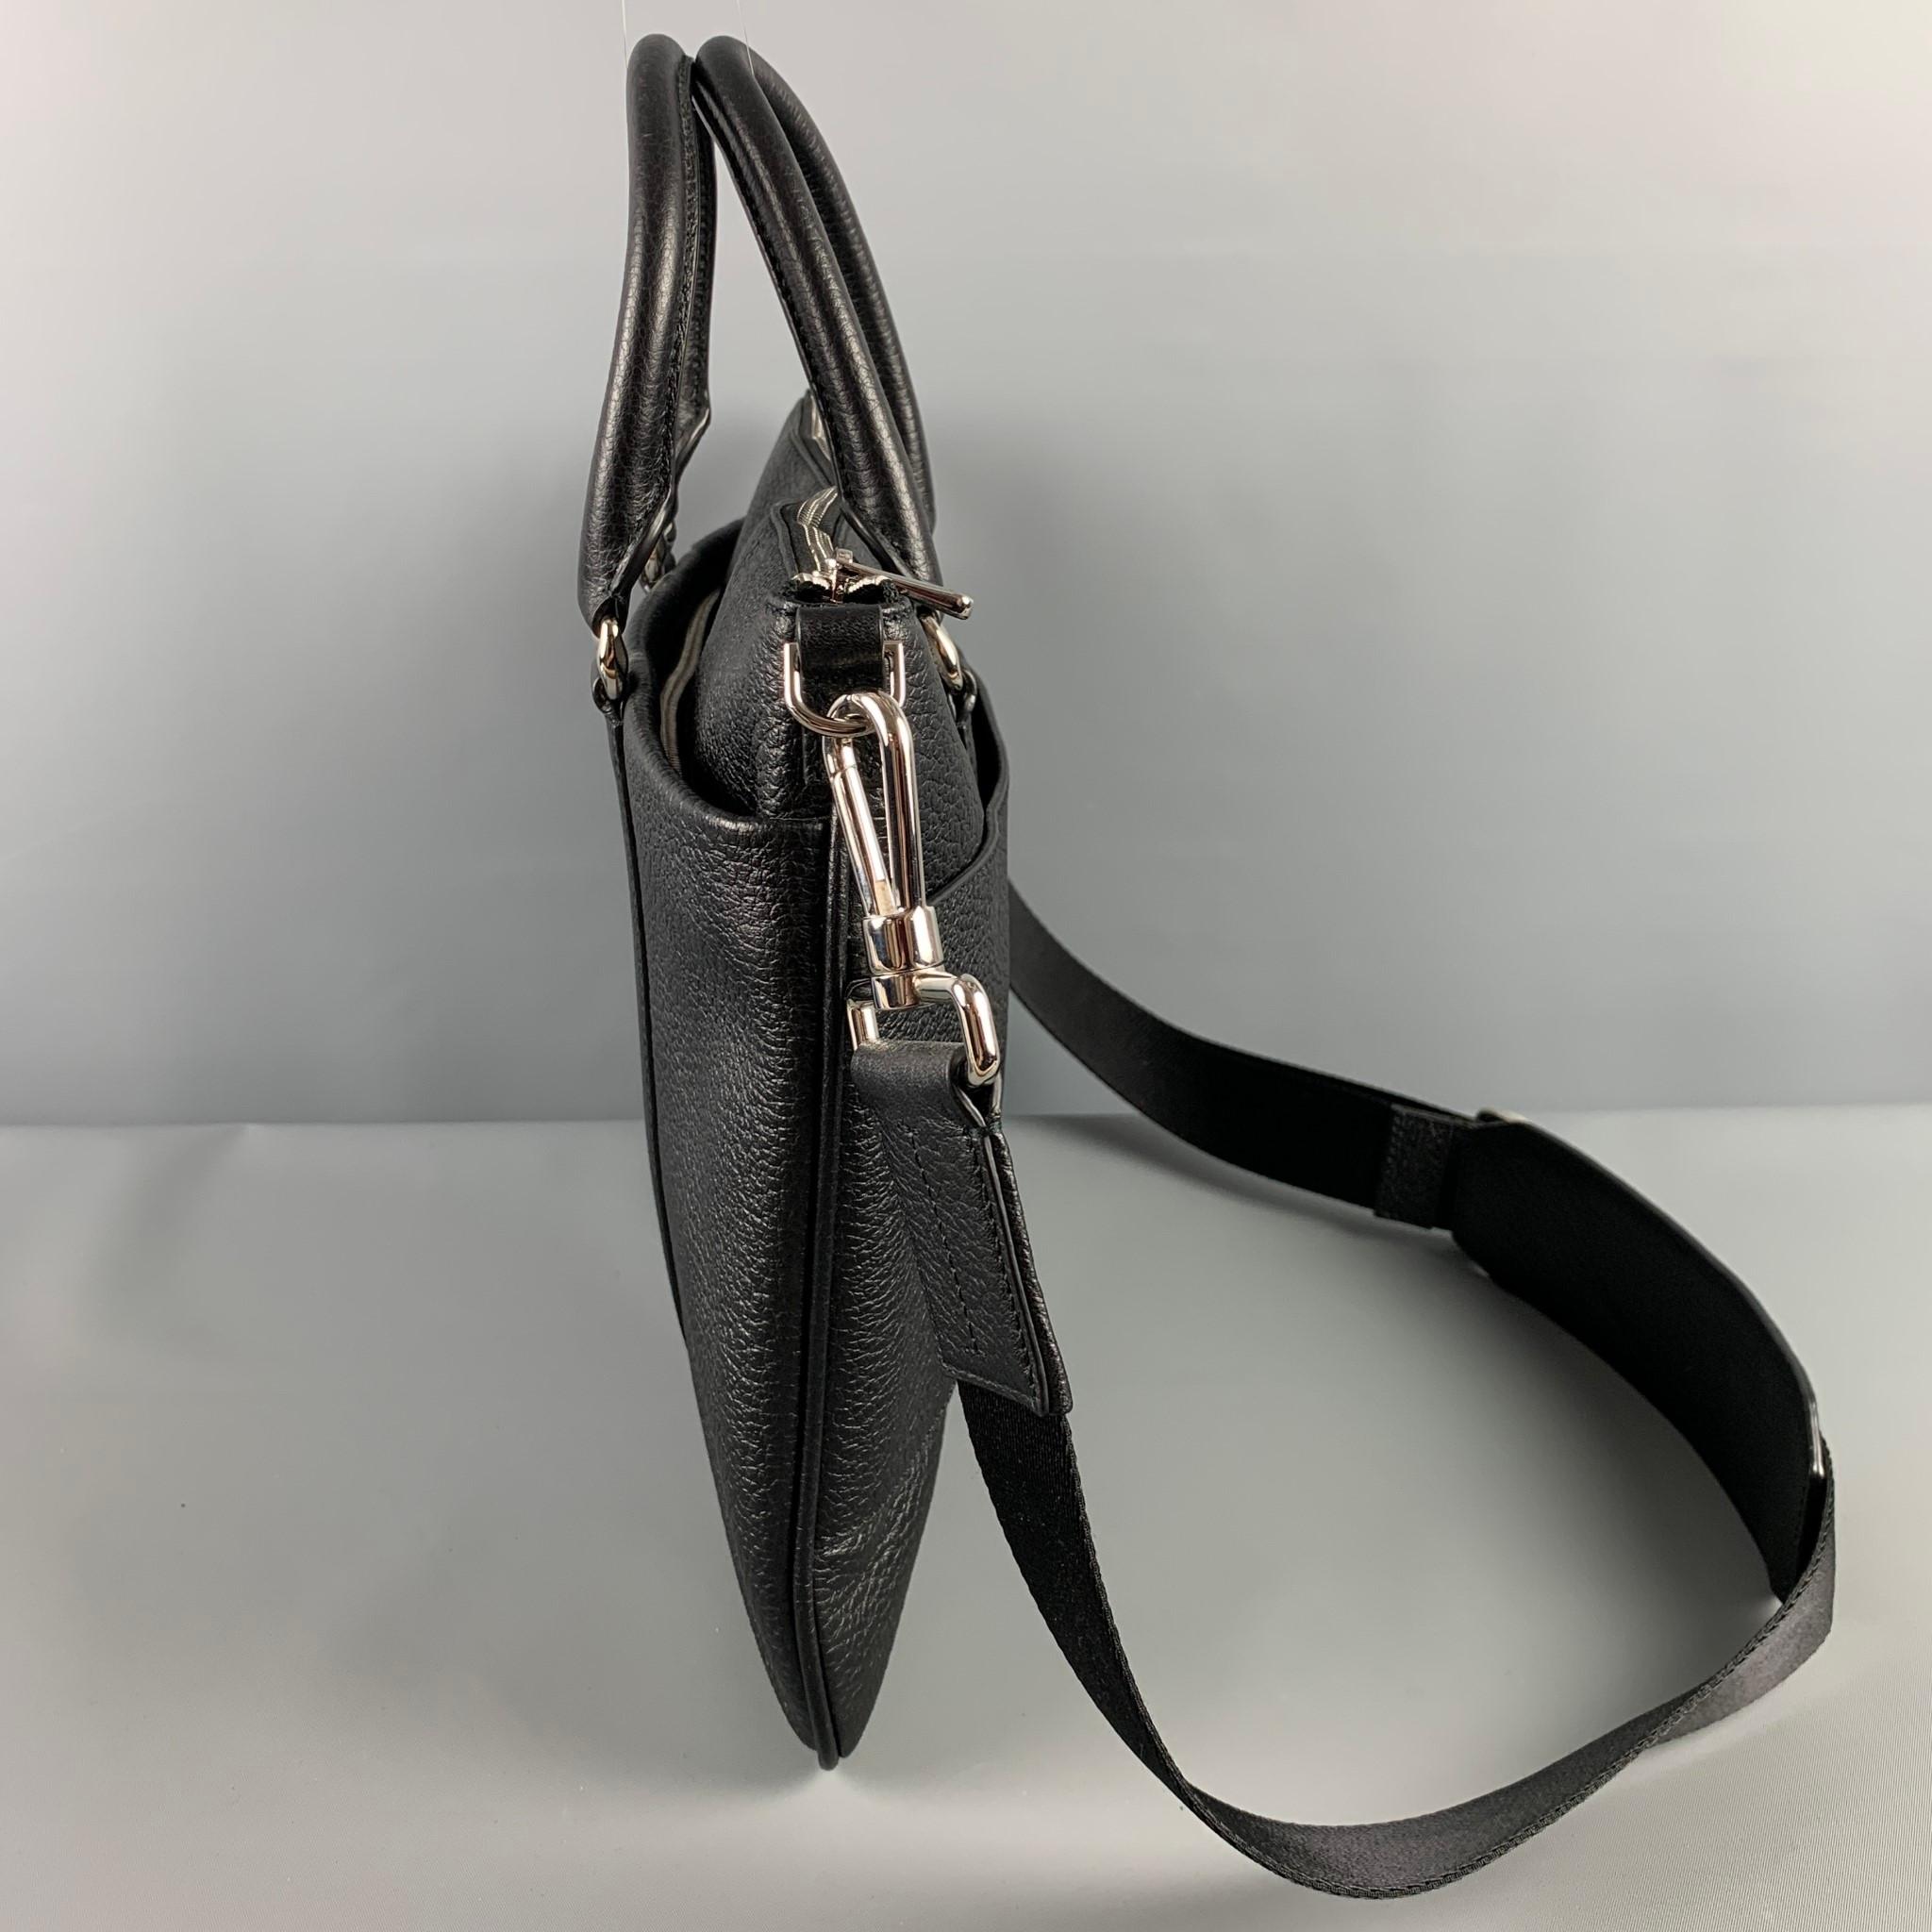 BALLY bag comes in a black pebble grain leather featuring top handles, detachable shoulder strap, silver tone hardware, inner slots, and a zipper closure. Includes tags. 

Excellent Pre-Owned Condition.

Measurements:

Length: 16 in.
Height: 11.25